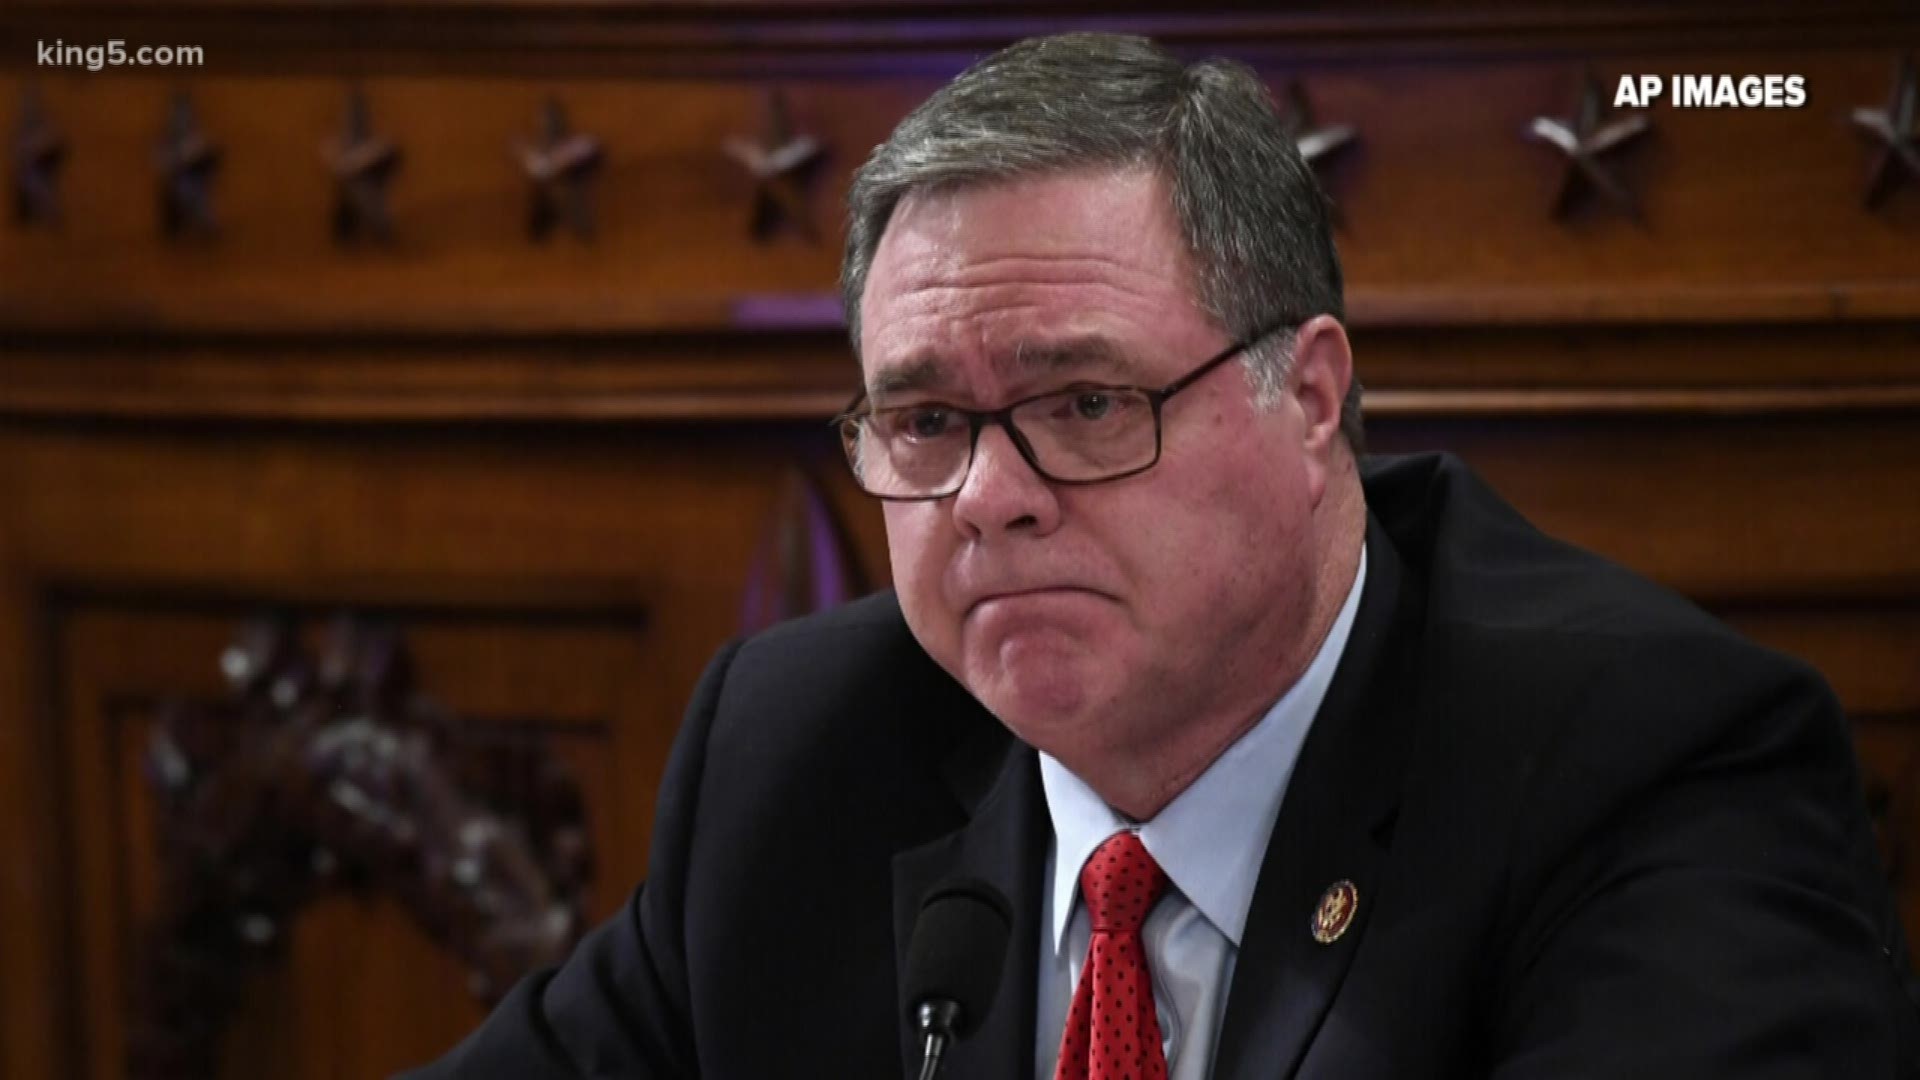 Washington Congressman Denny Heck announced Dec. 4, 2019 he will retire at the end of the 116th Congress.